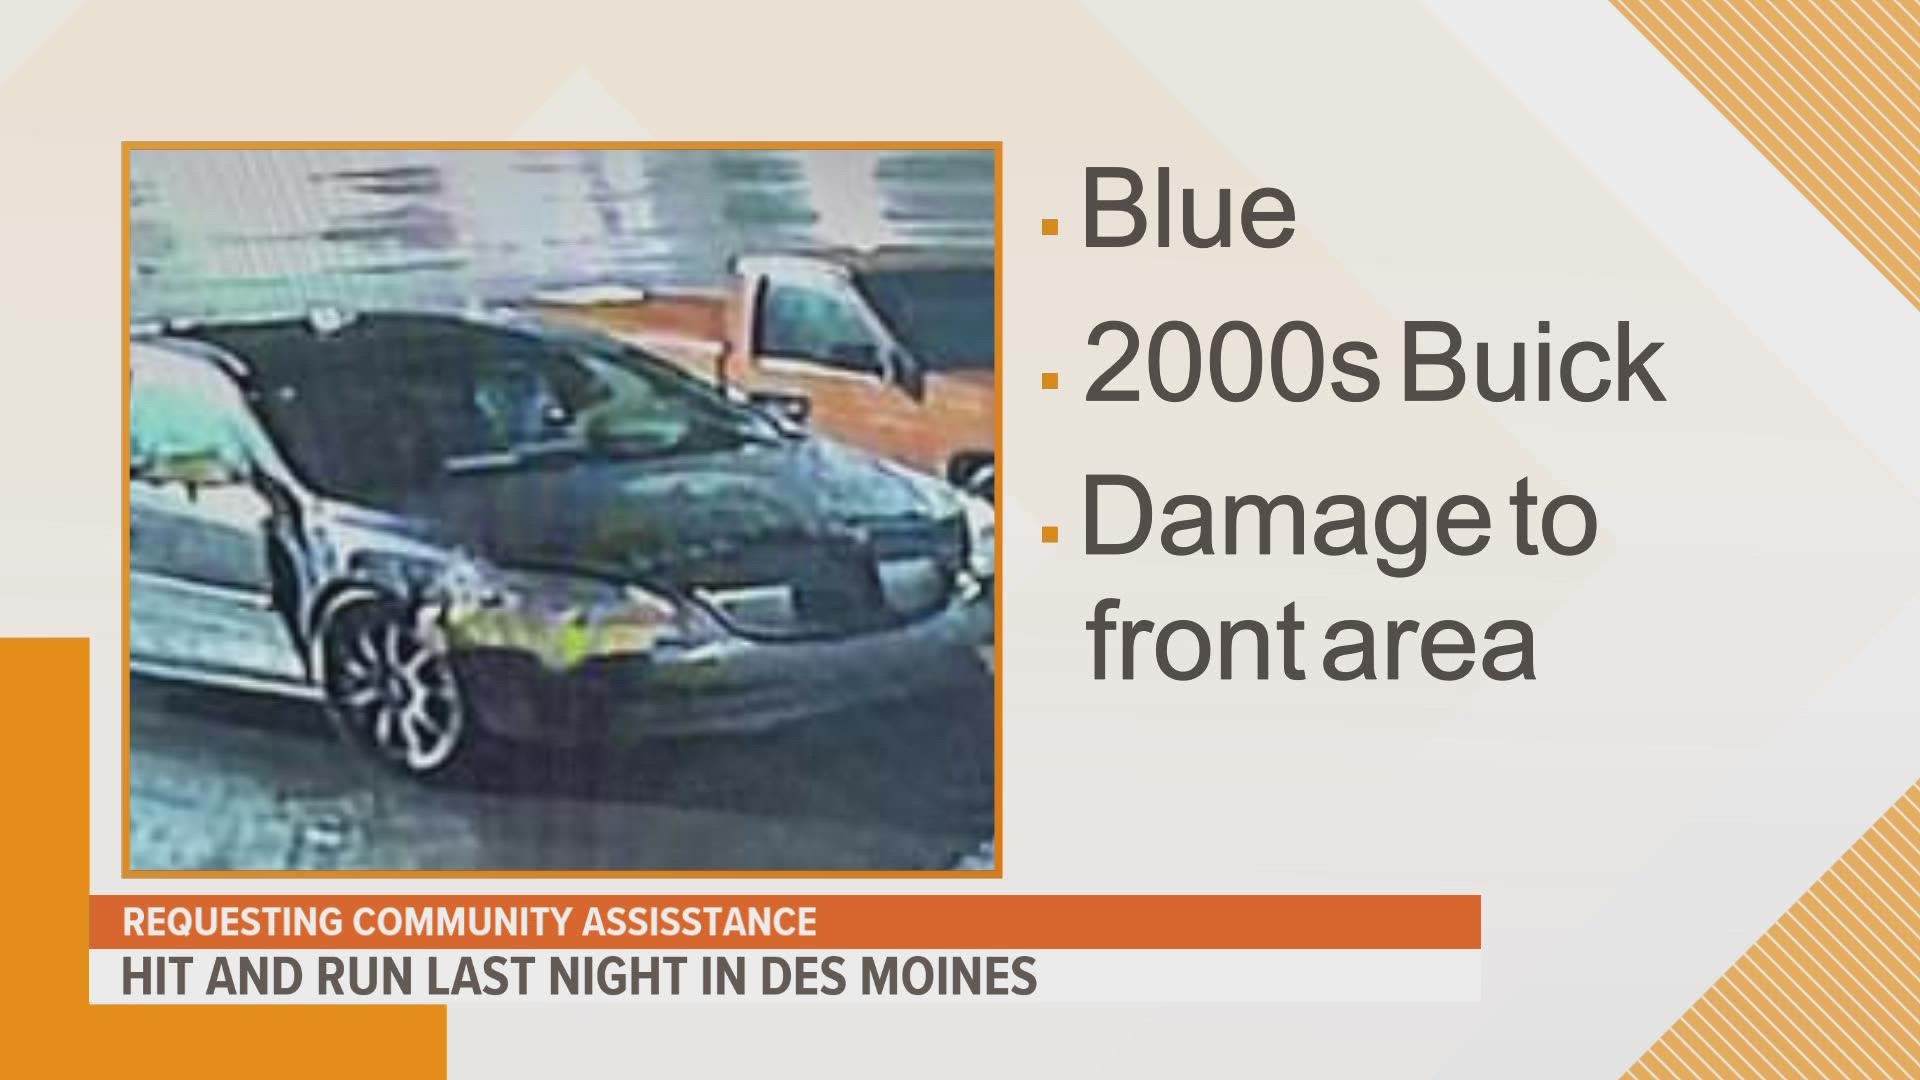 Police say a blue-colored 2000s Buick with damage to the front bumper hit a 57-year-old man in a Des Moines parking lot around 9:30 p.m. Thursday.